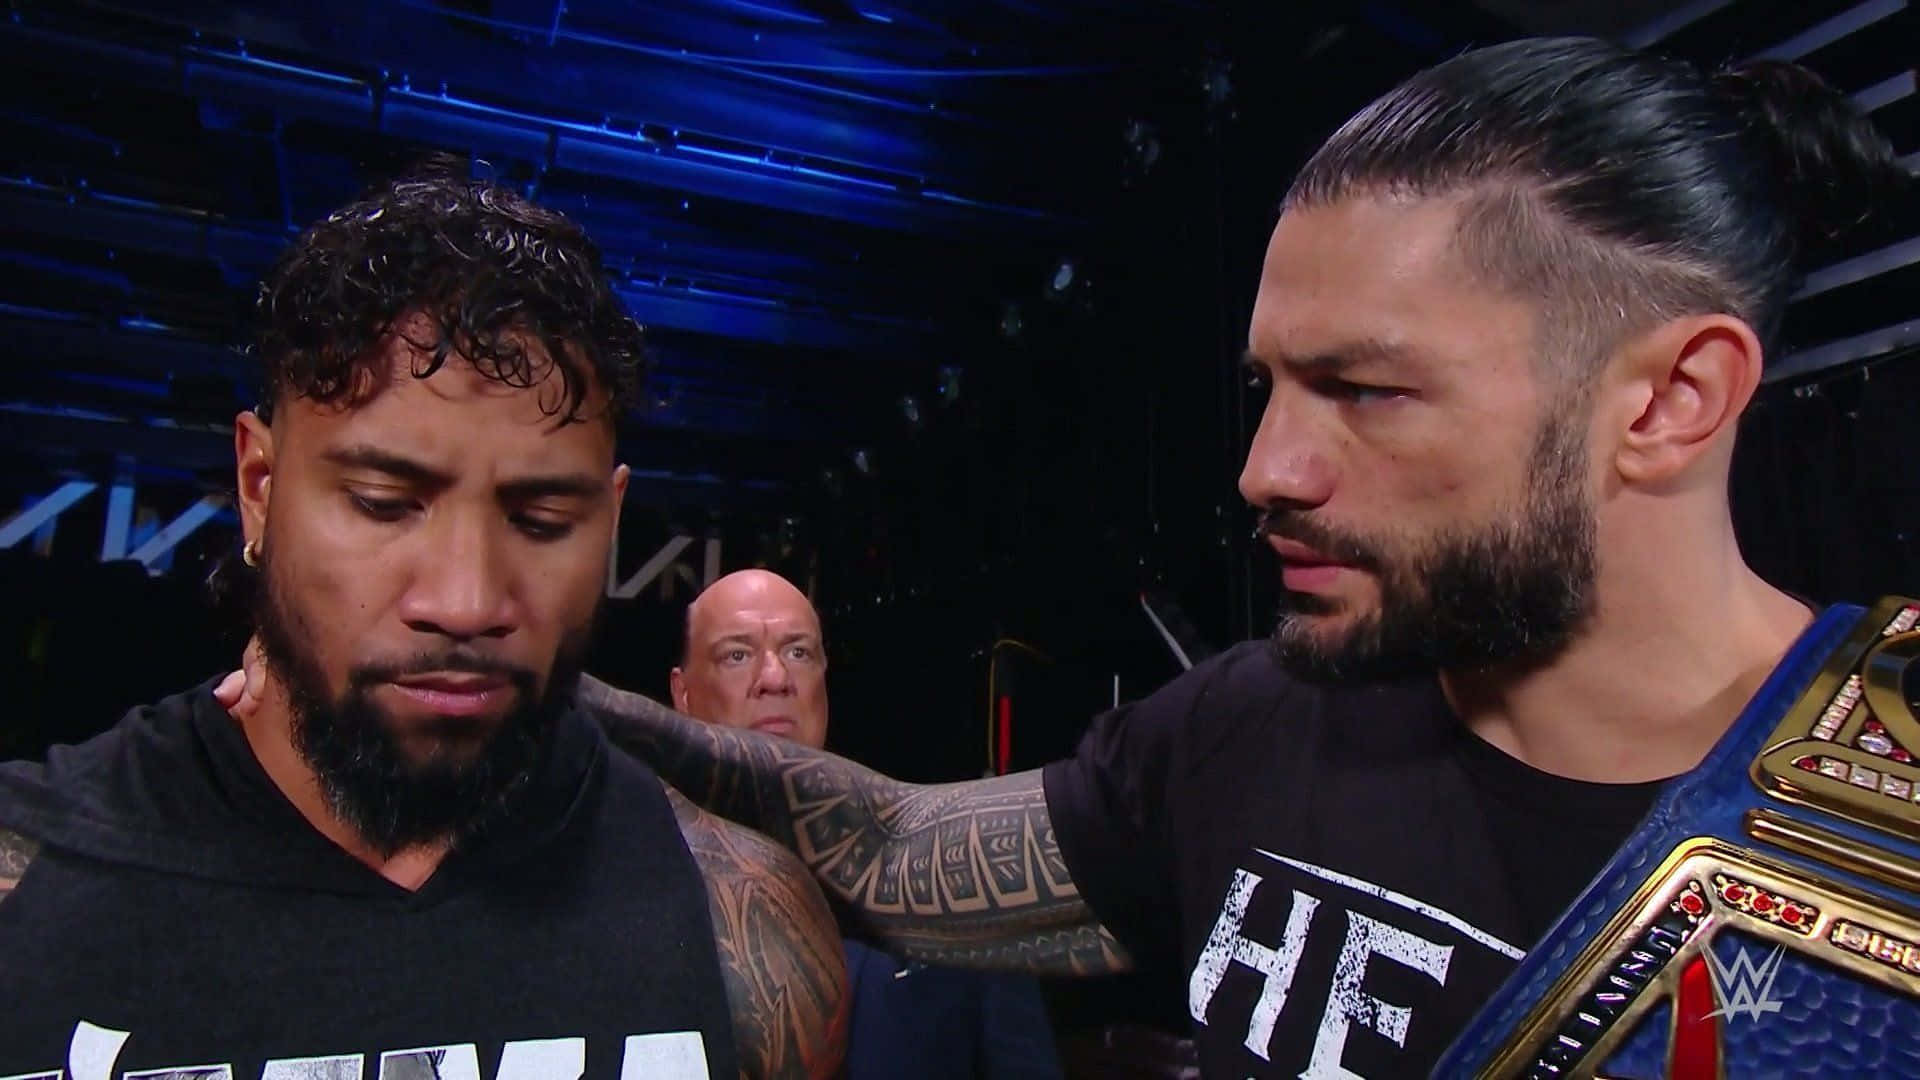 Wwe Smackdown Jey Uso And Roman Reigns Wallpaper